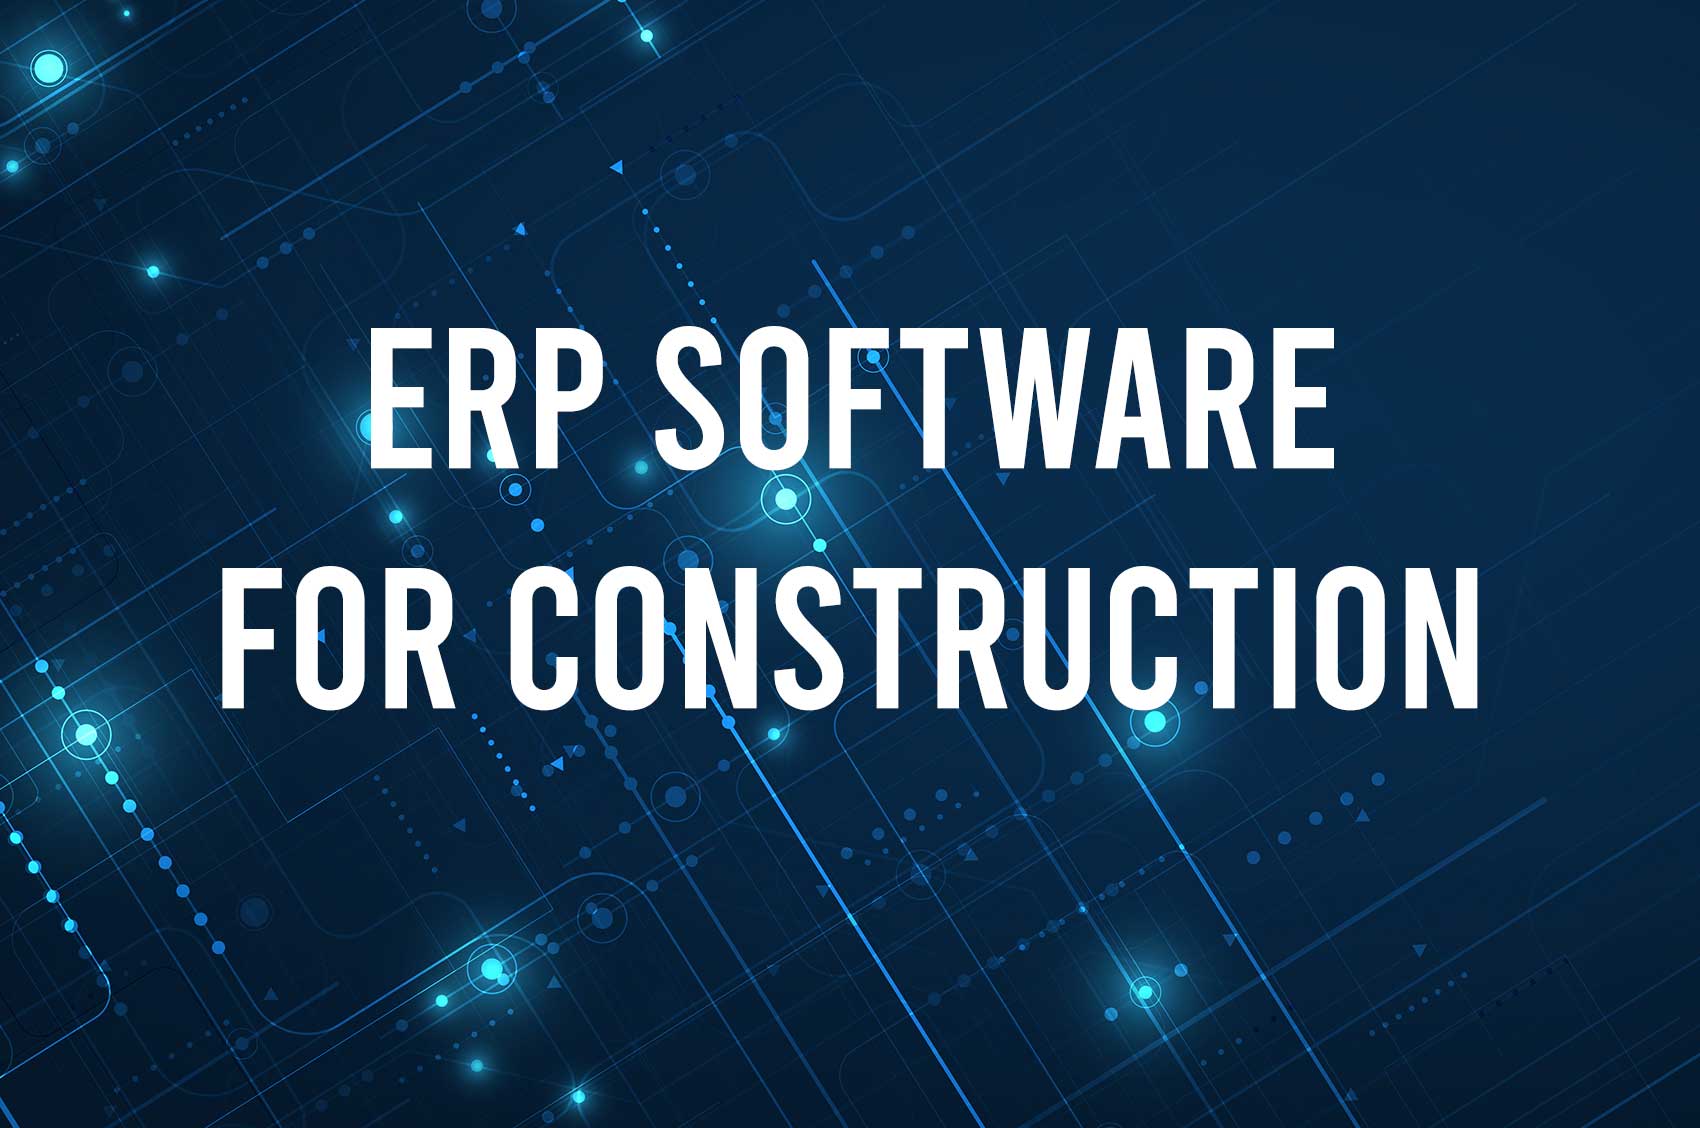 Moving towards a digital future with ERP construction software